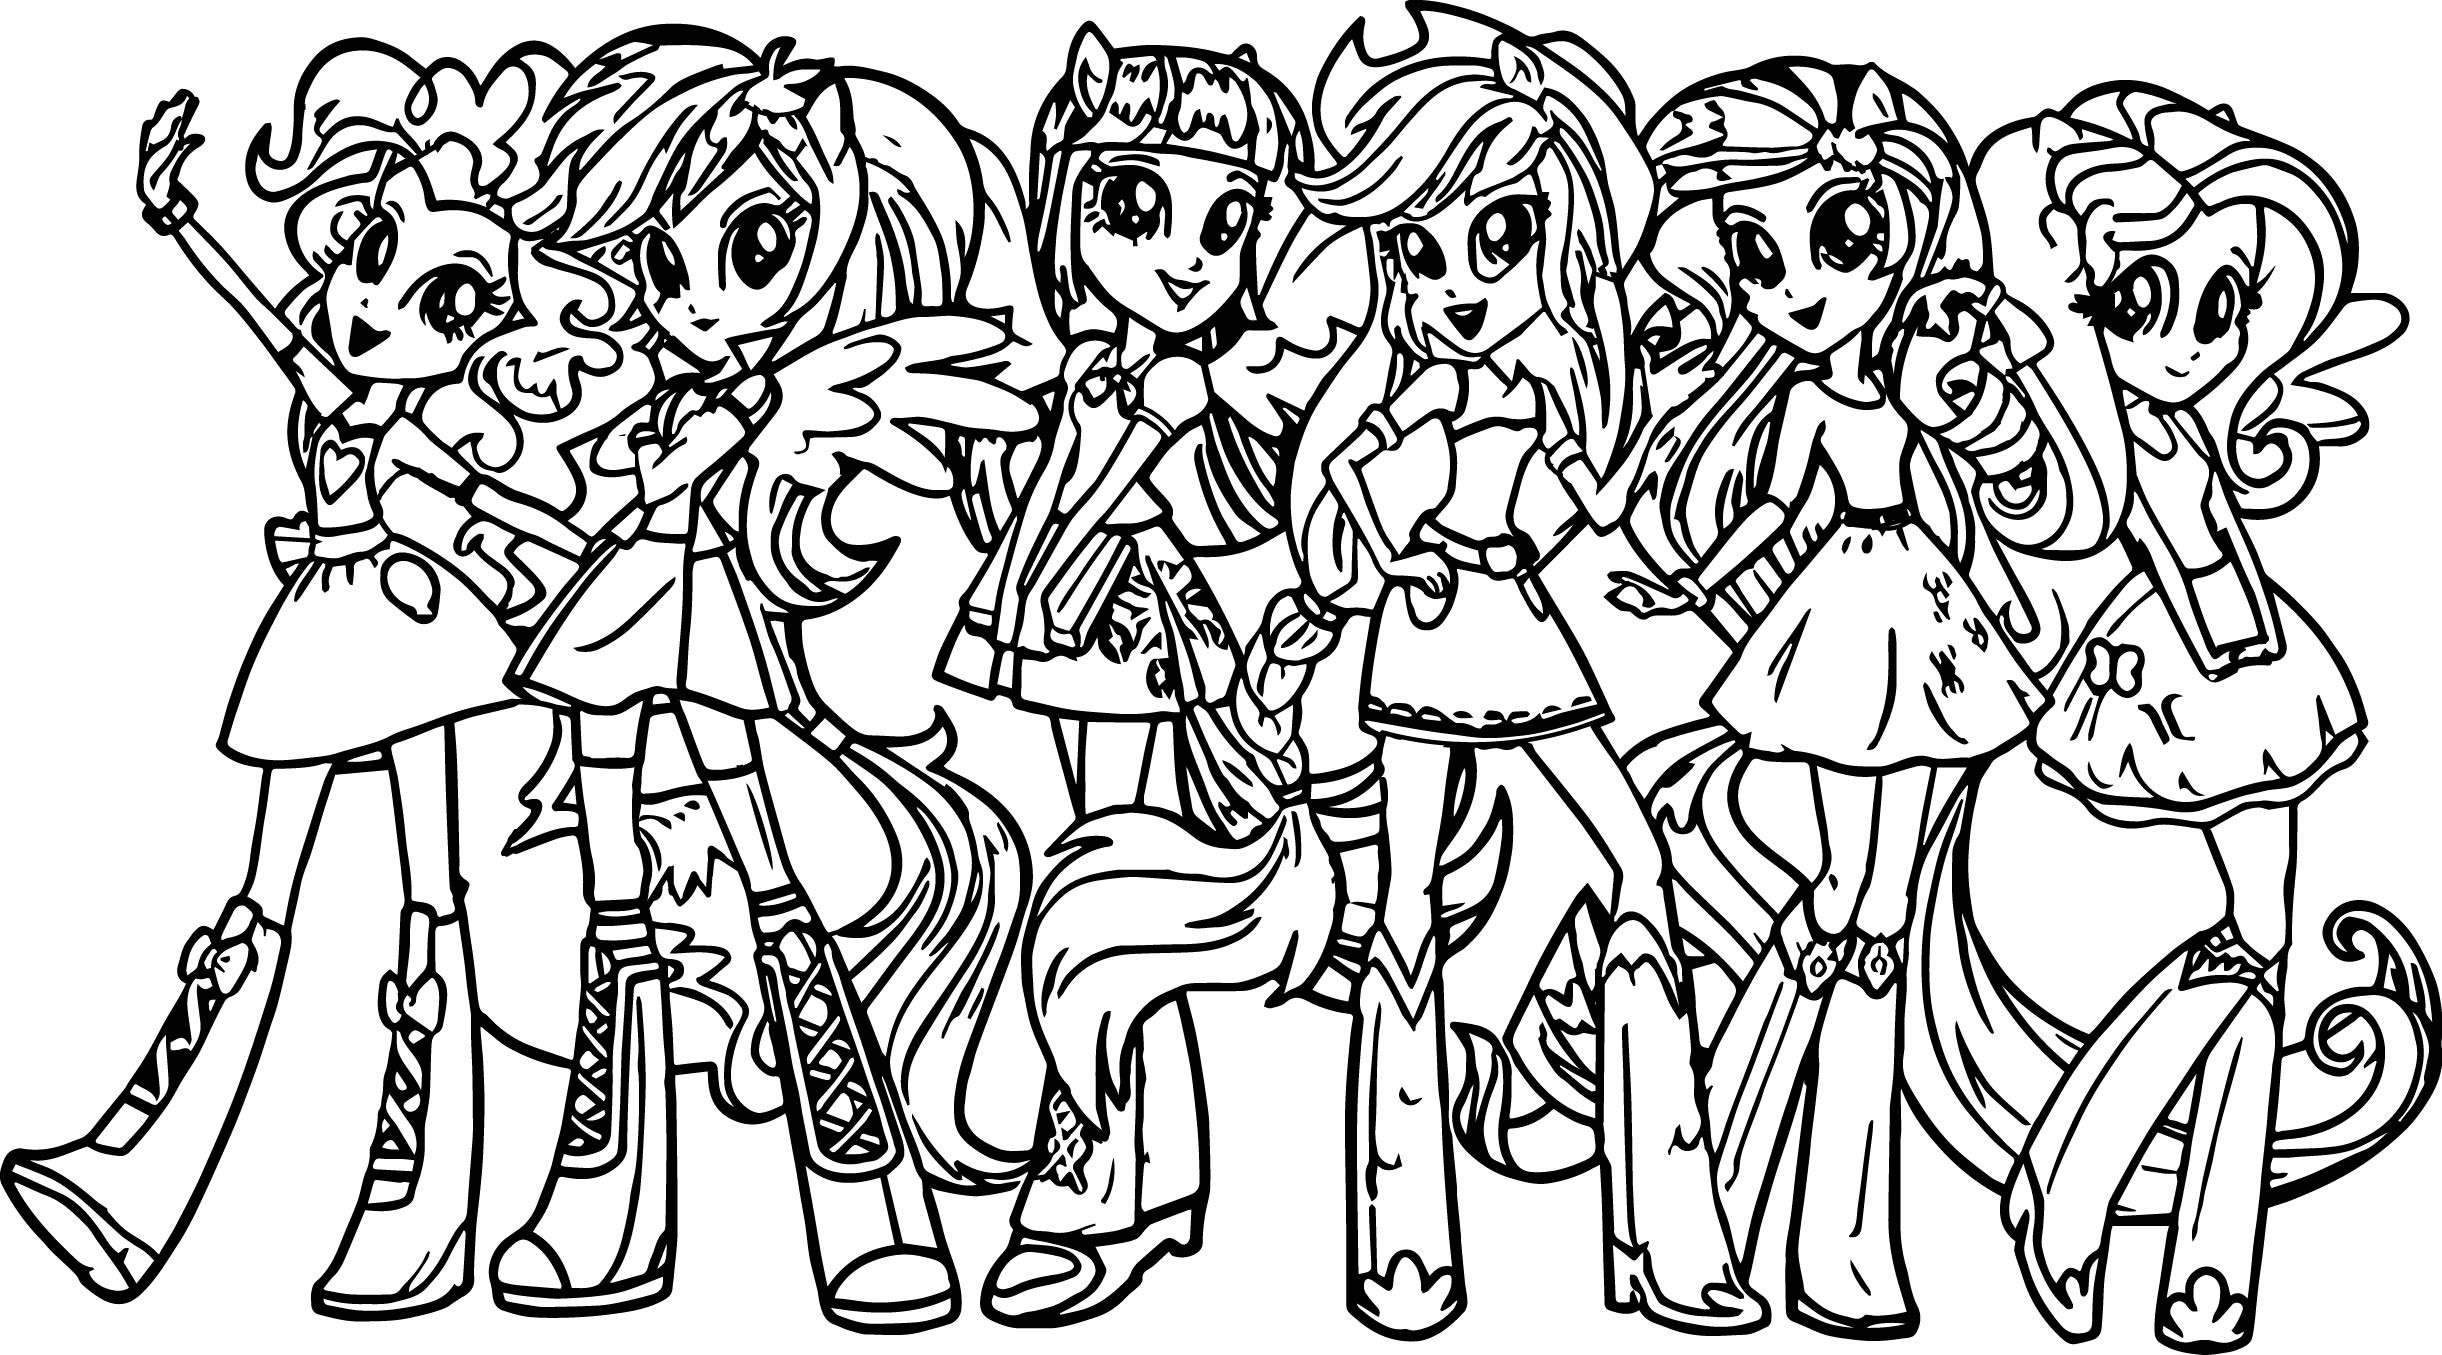 Coloring Sheets For Girls Mlp
 My Little Pony Girls Coloring Page